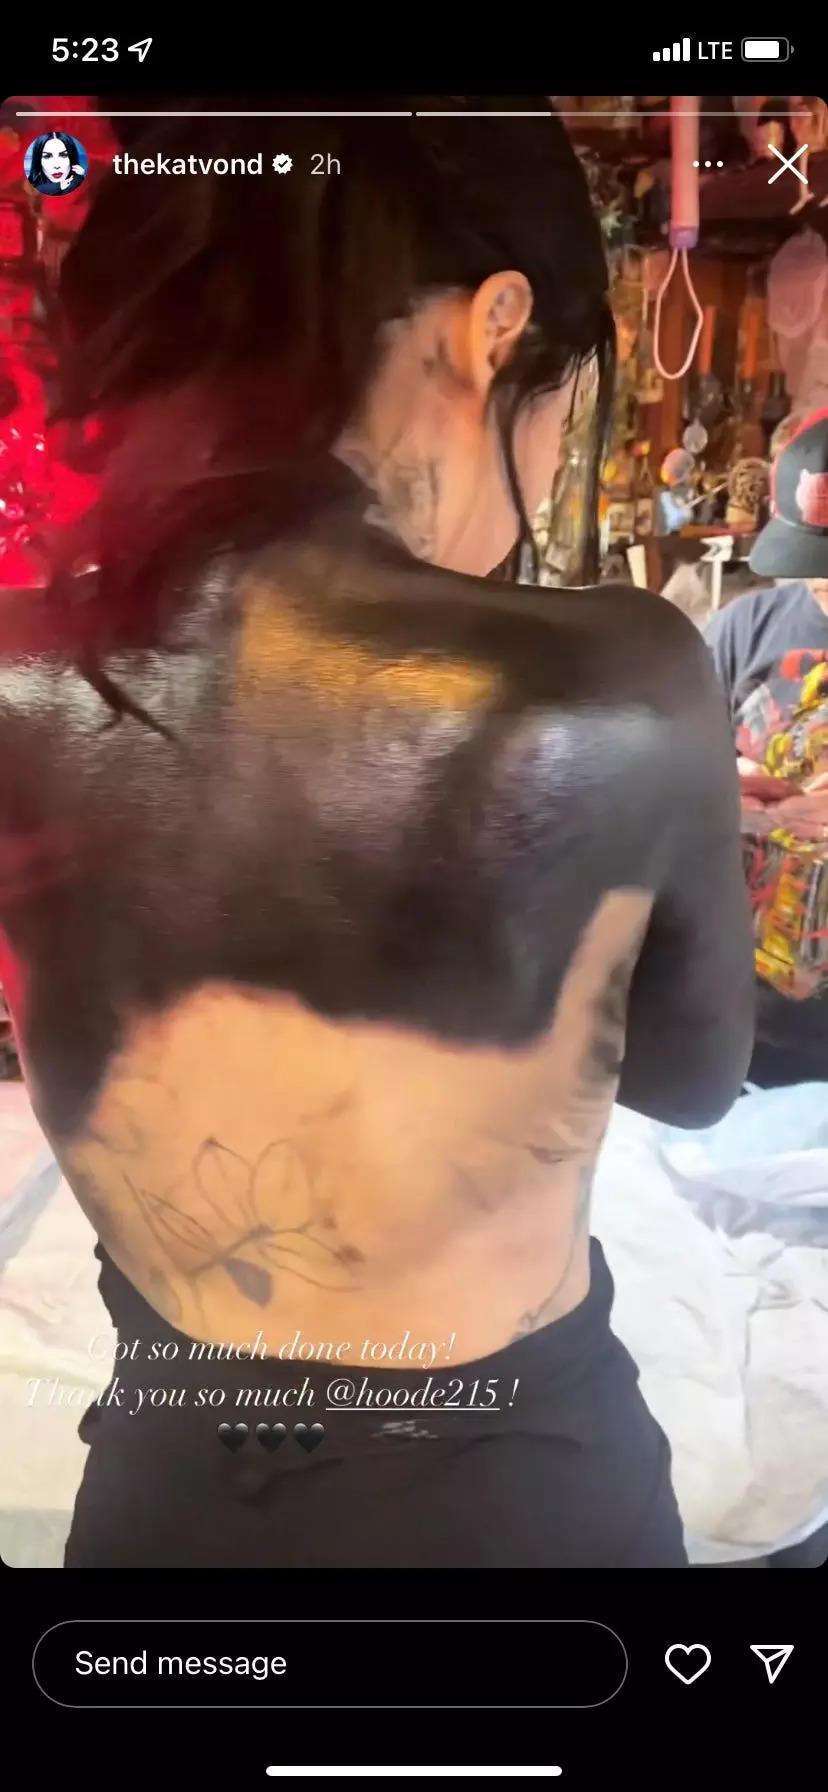 Kat Von D revealed that she's covering tattoos on her back with solid black  ink | Business Insider India